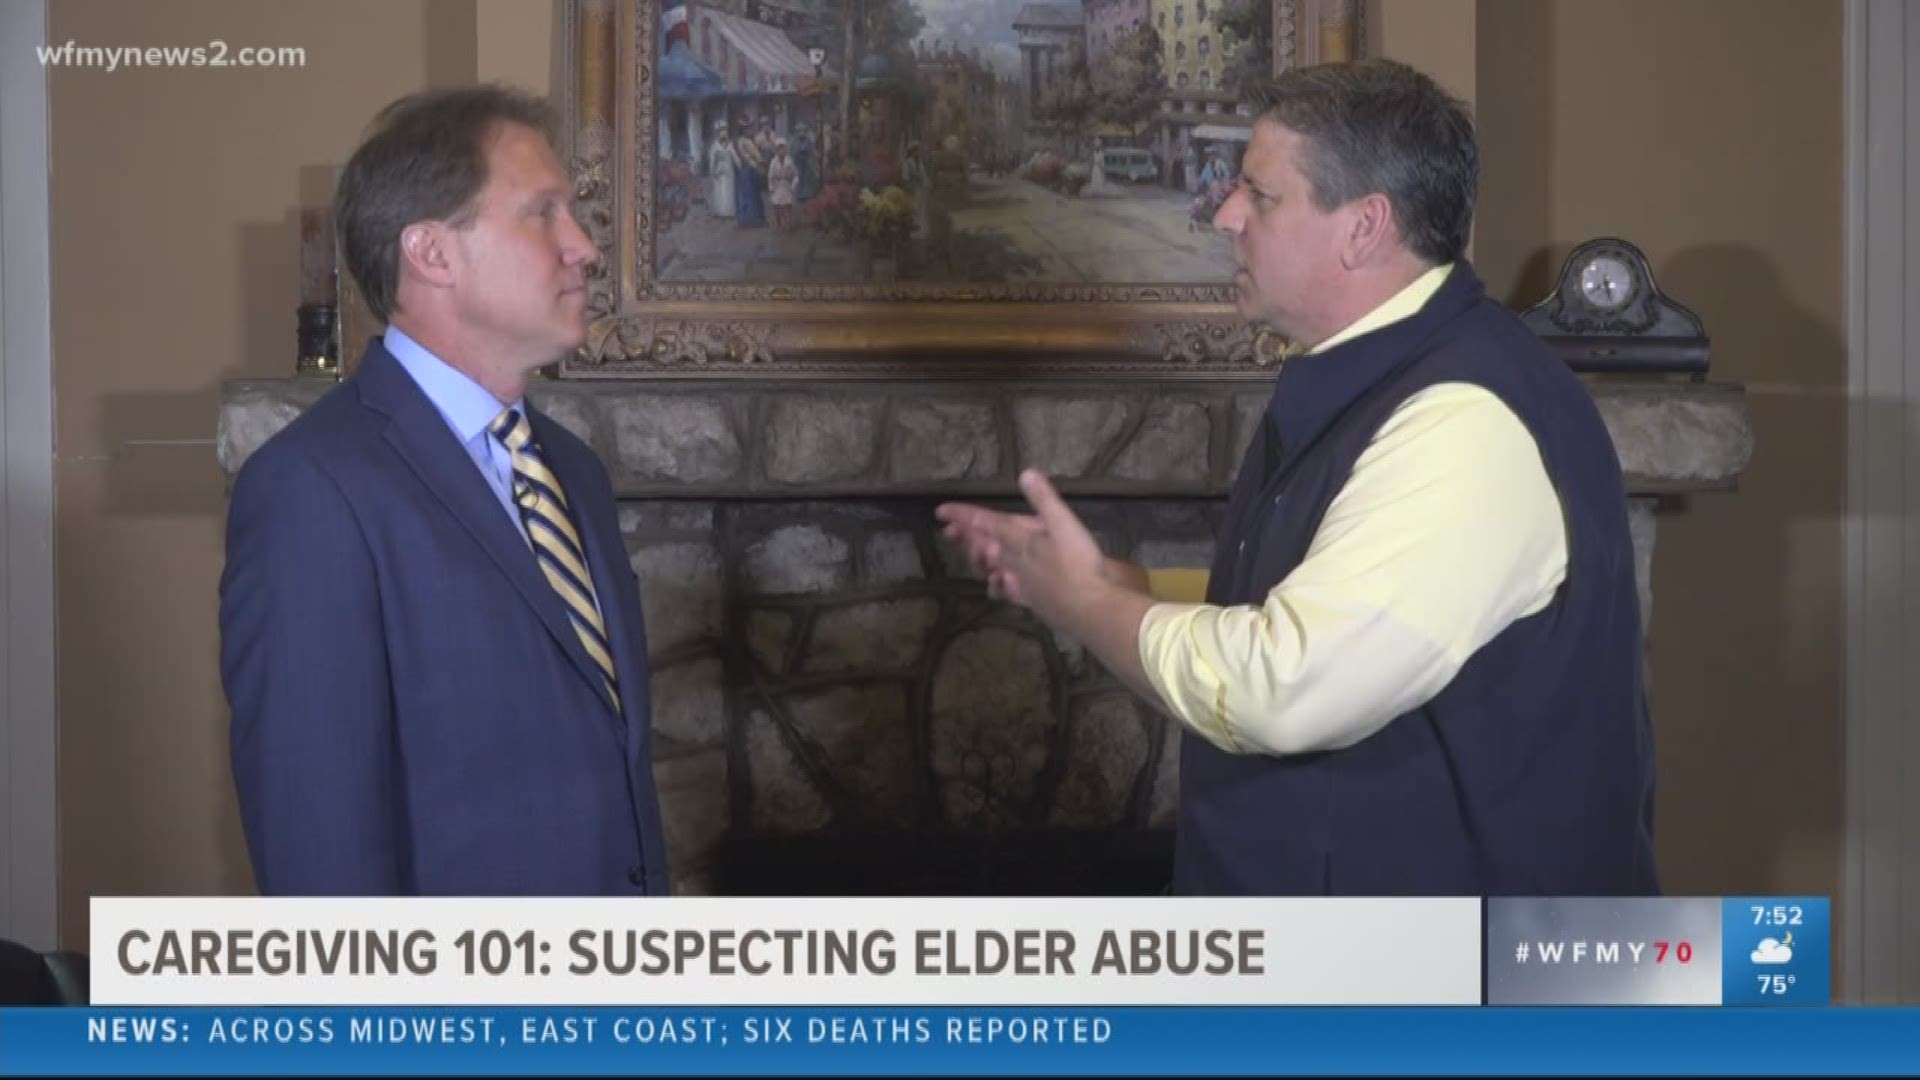 Scott Silknitter talks with Roane-Law about what signs indicate abuse.